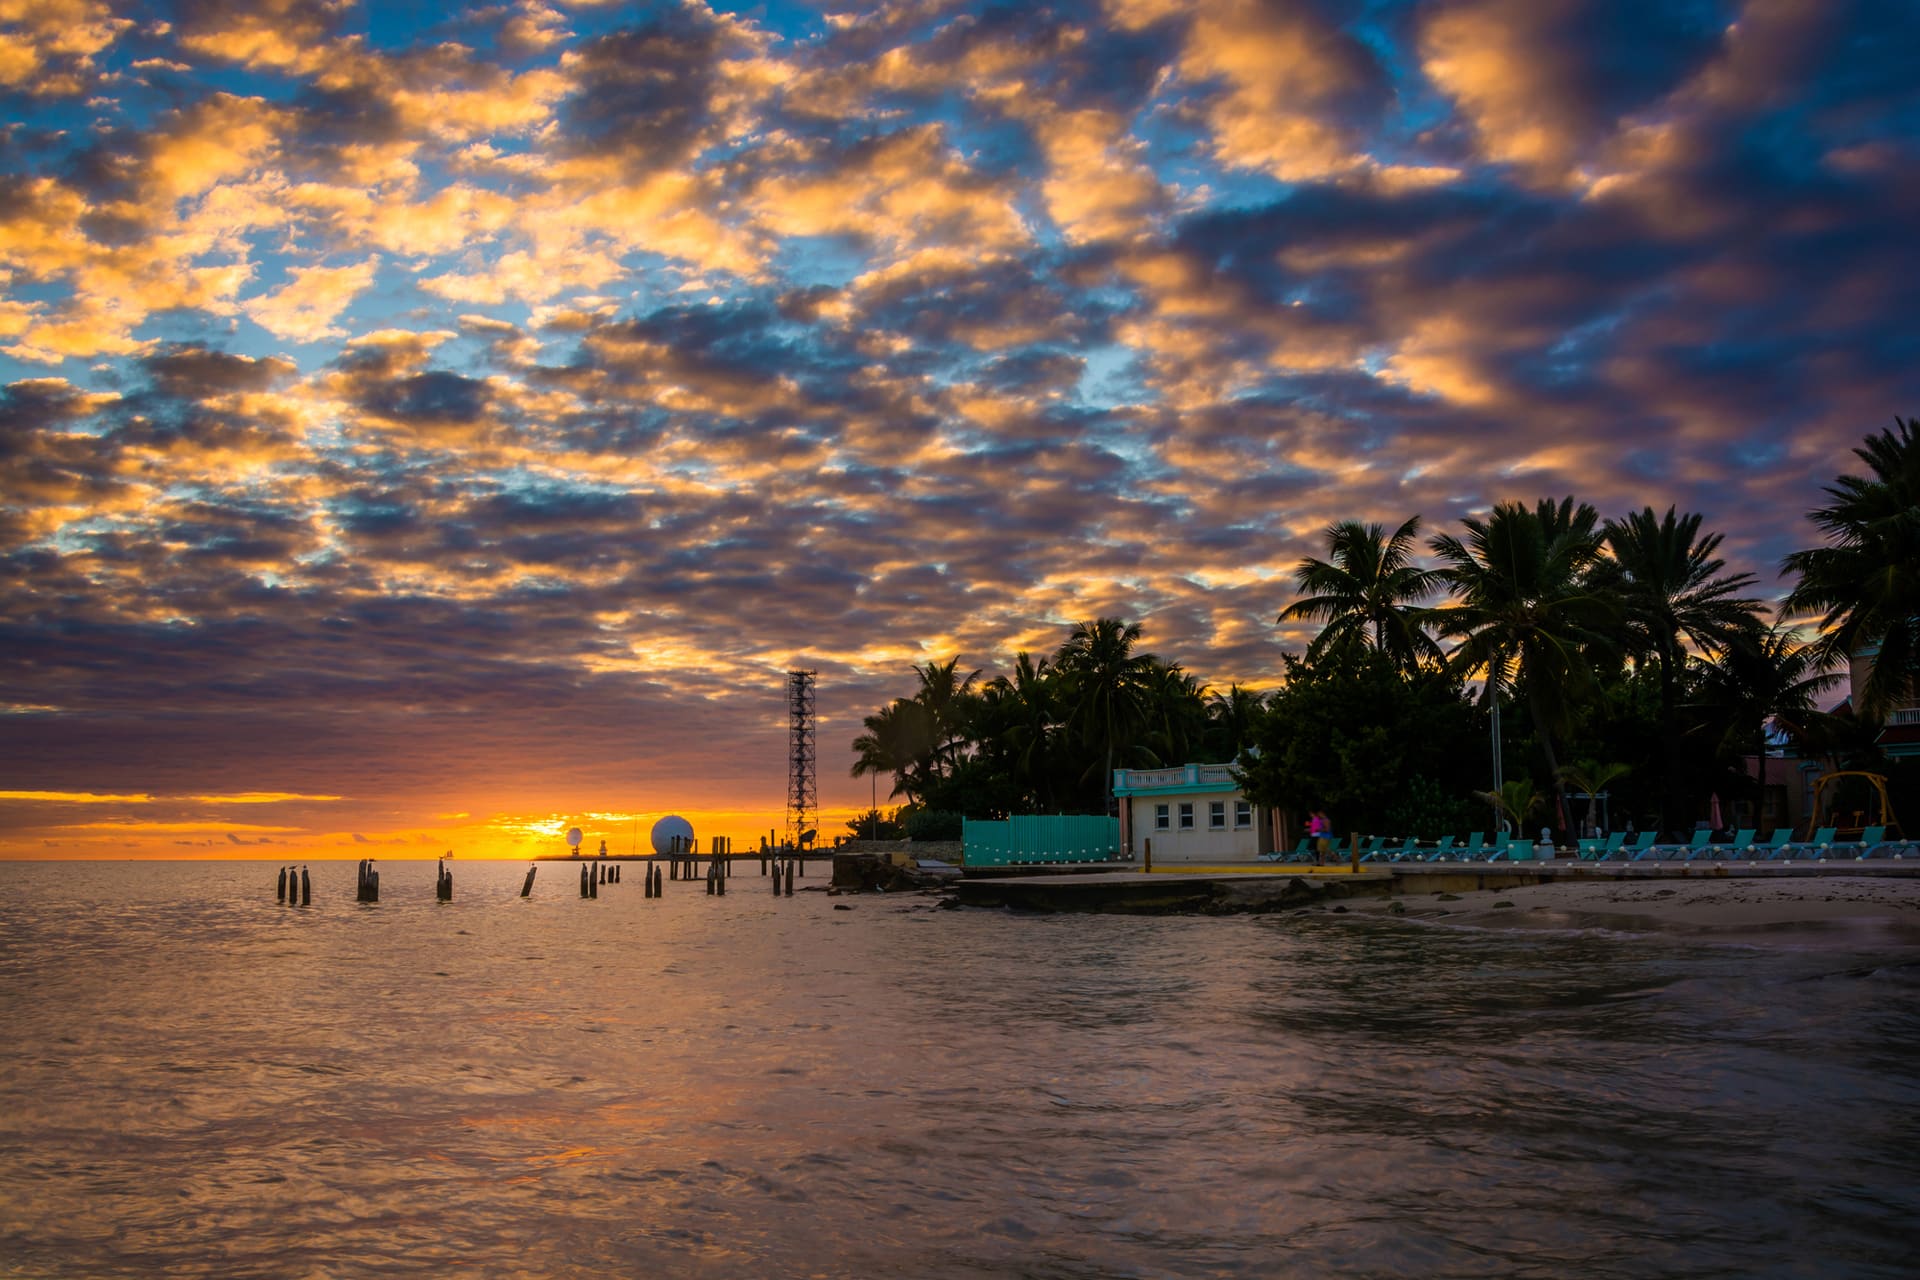 10 Things to Do After Dinner in Key West - Where to Go in Key West